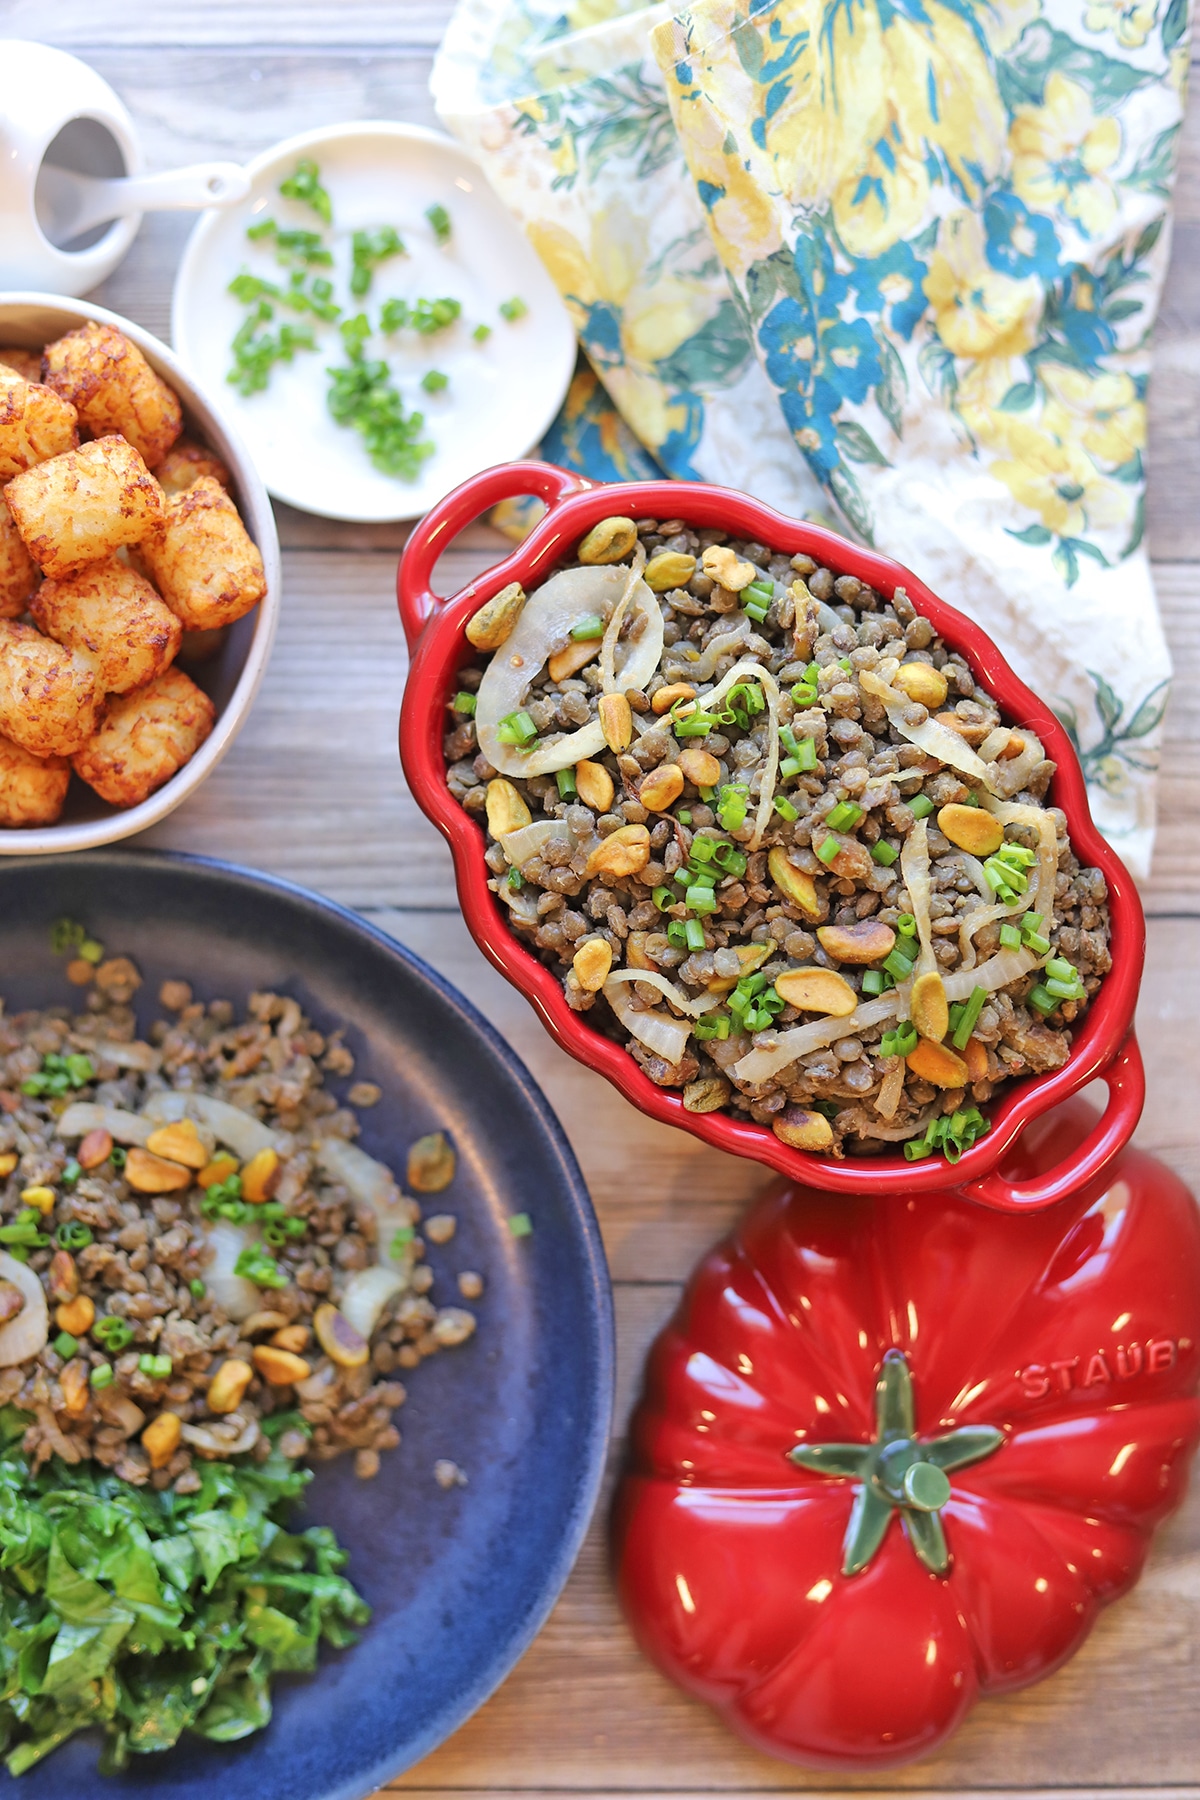 Overhead red serving dish with Puy lentils, tater tots, and kale.